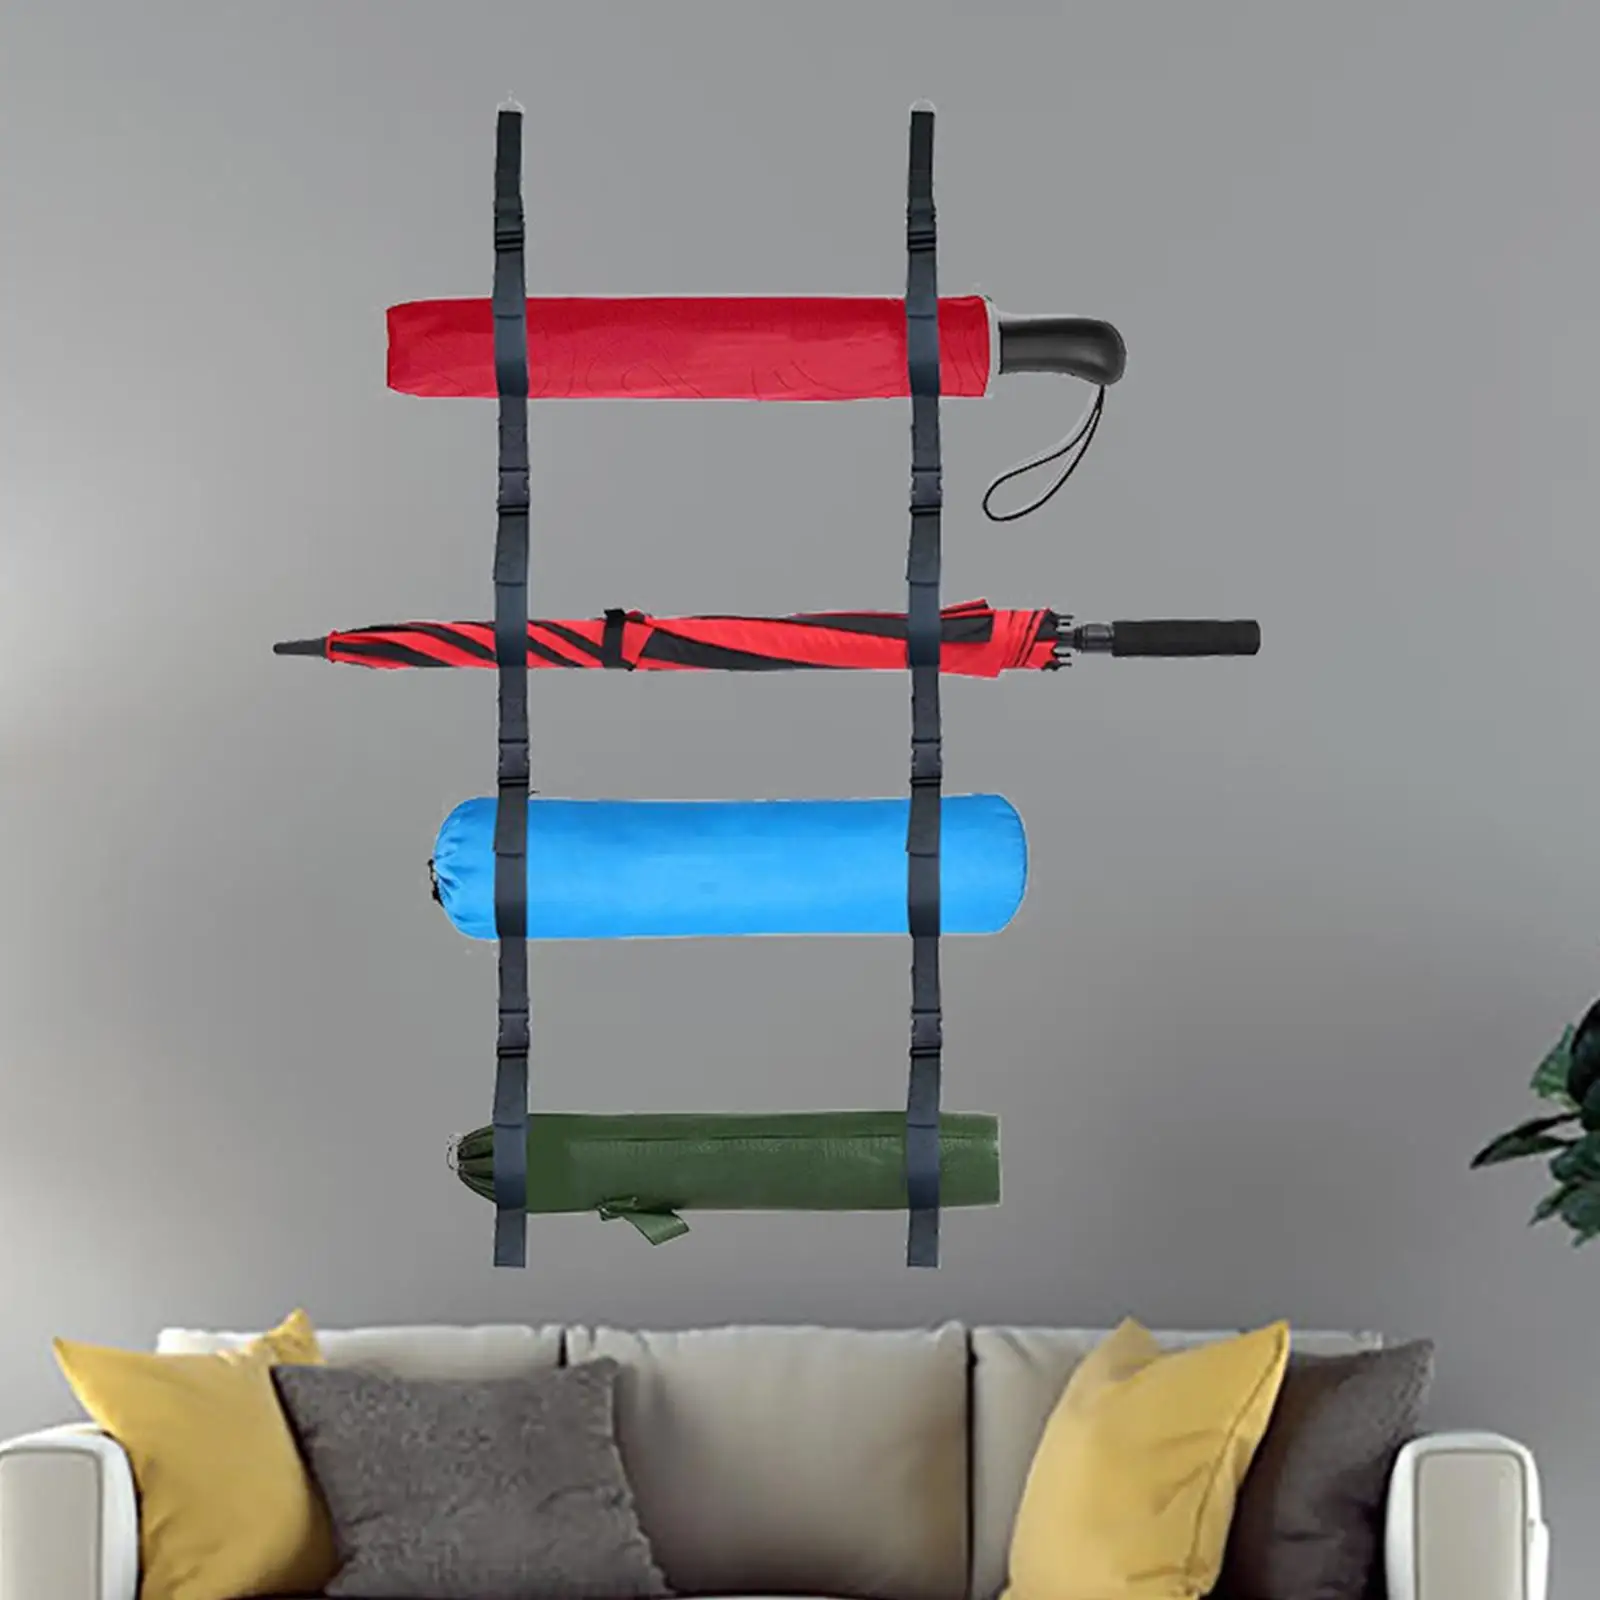 Garage Camping Chair Wall Storage Reusable Simple strong Multipurpose Wall Storage Straps Quick Release Buckles Fixing Belt